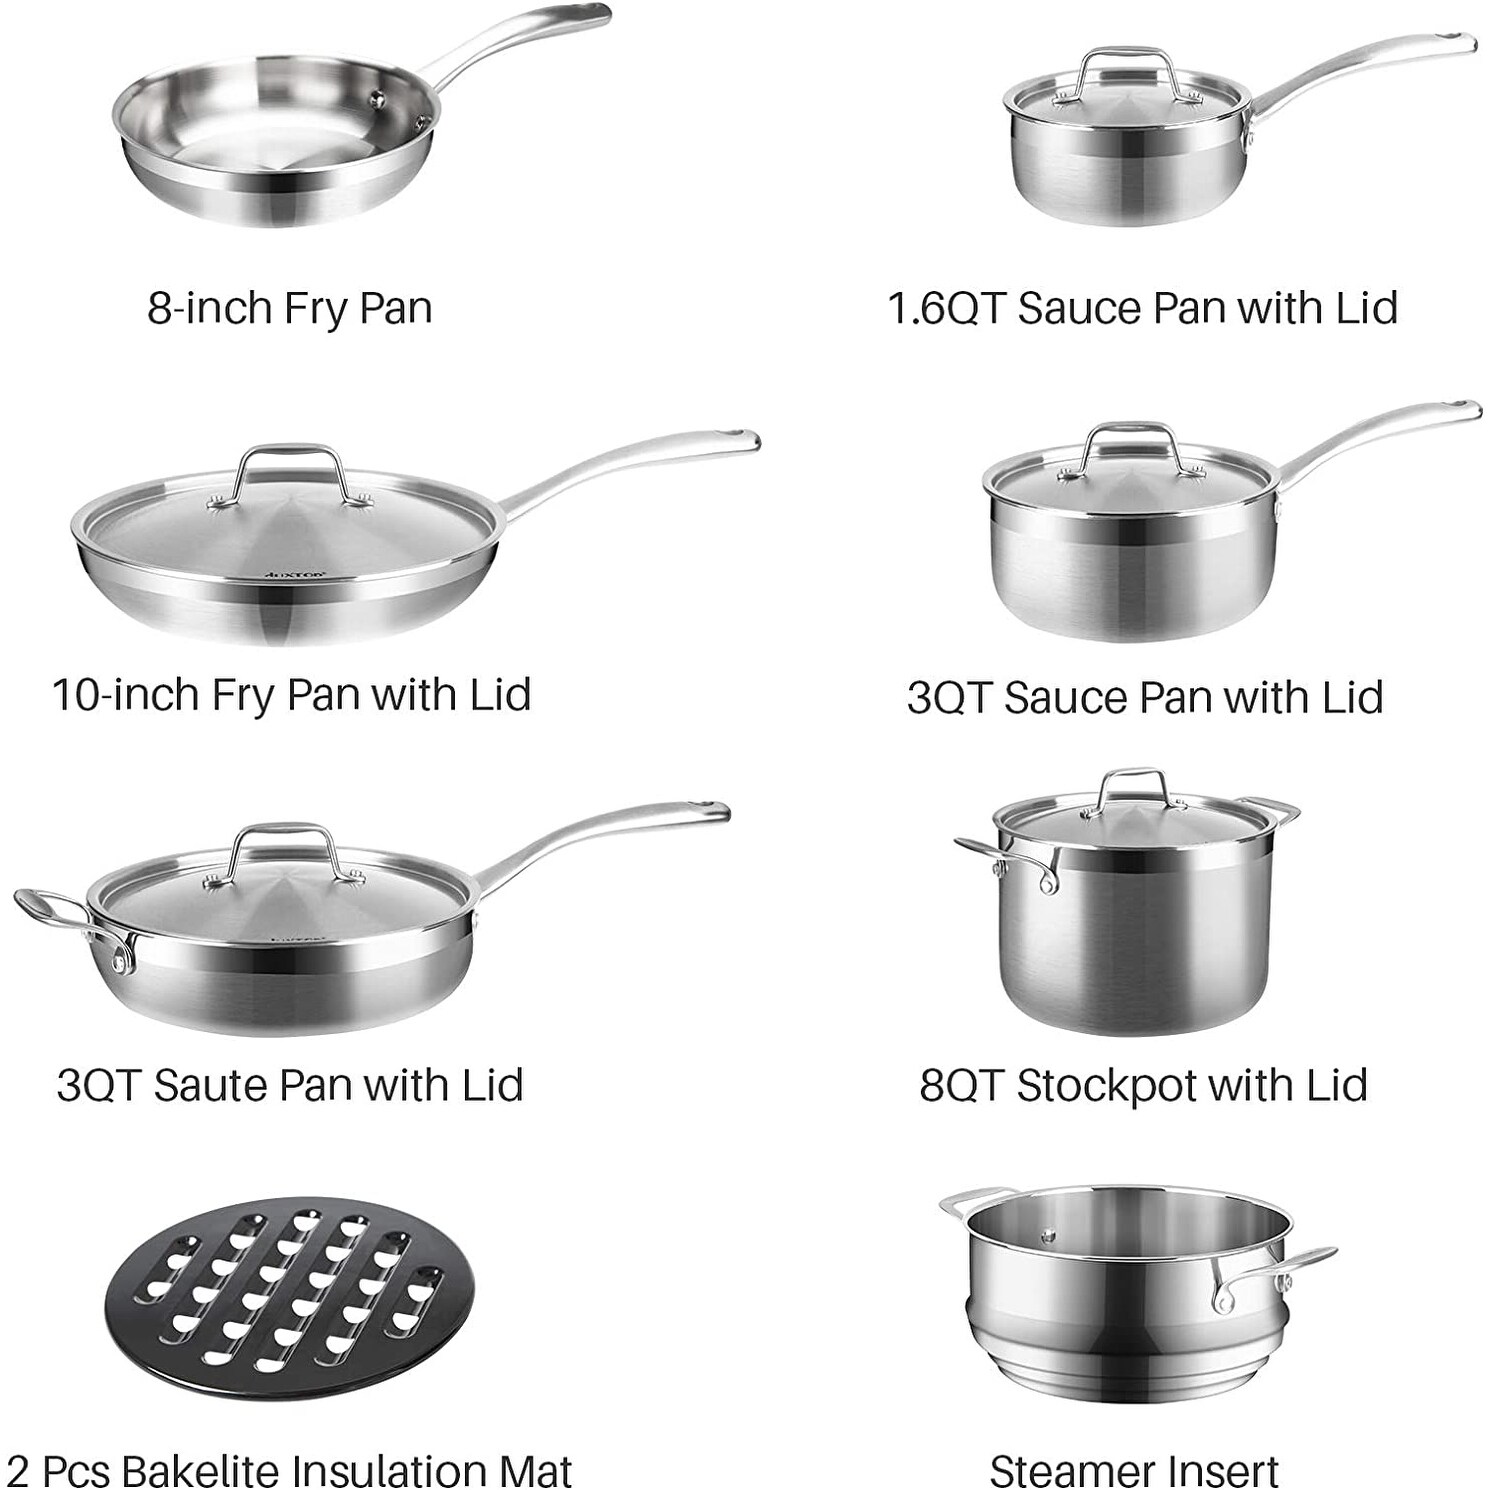 Duxtop 1.6 Qt Saucepan with Lid, Whole-Clad Tri-Ply Stainless Steel Sauce  Pan, Kitchen Induction Cookware - The Secura